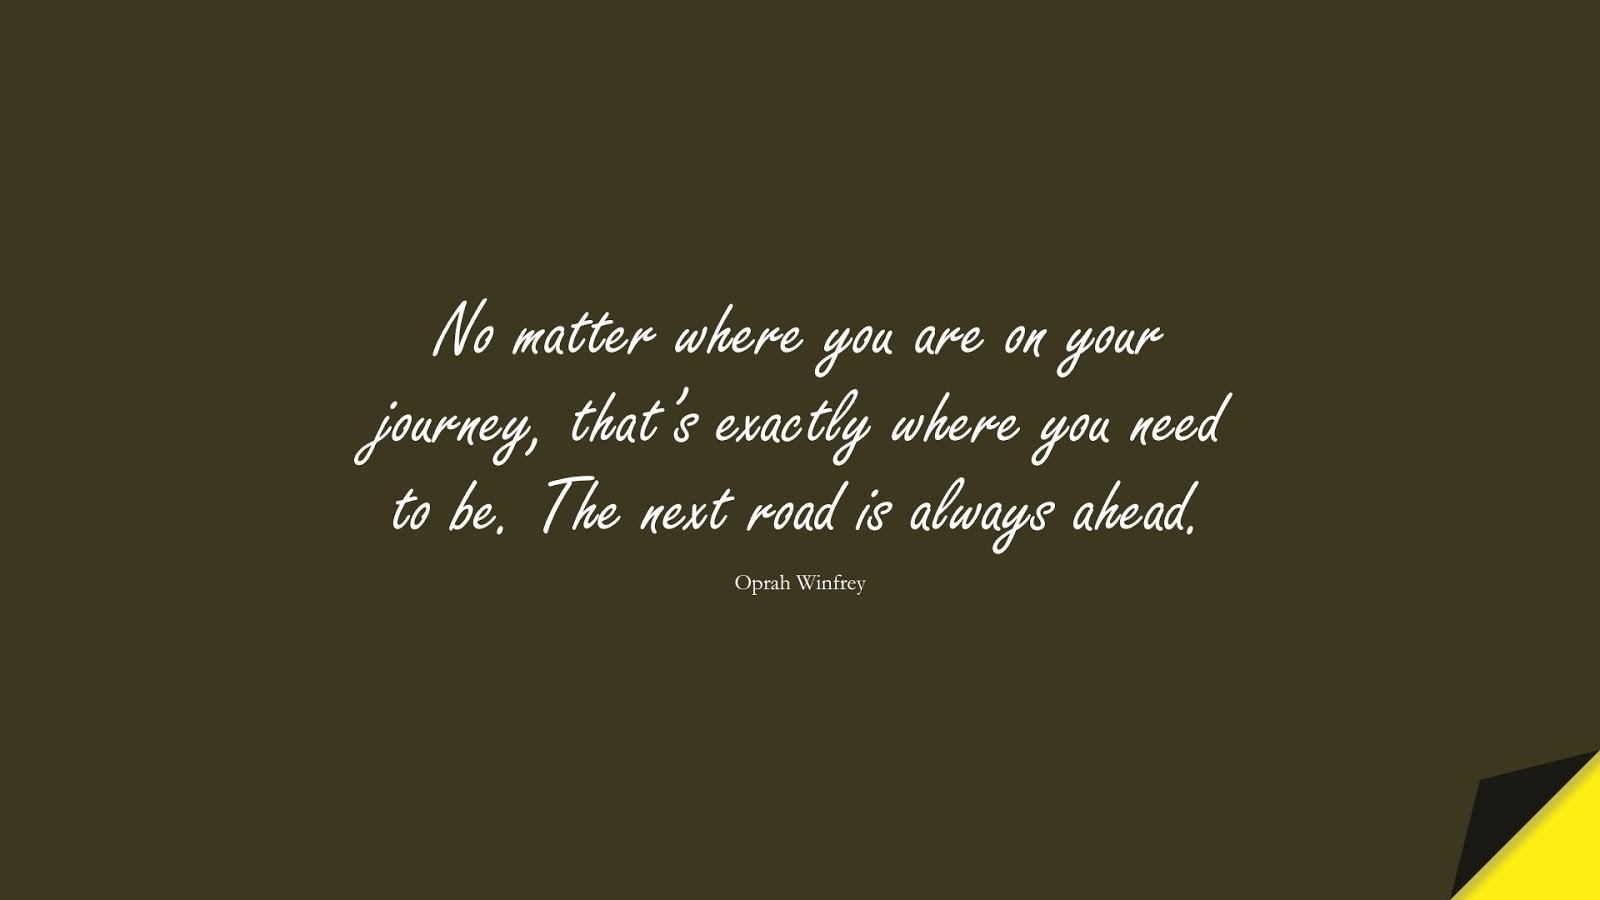 No matter where you are on your journey, that’s exactly where you need to be. The next road is always ahead. (Oprah Winfrey);  #HopeQuotes